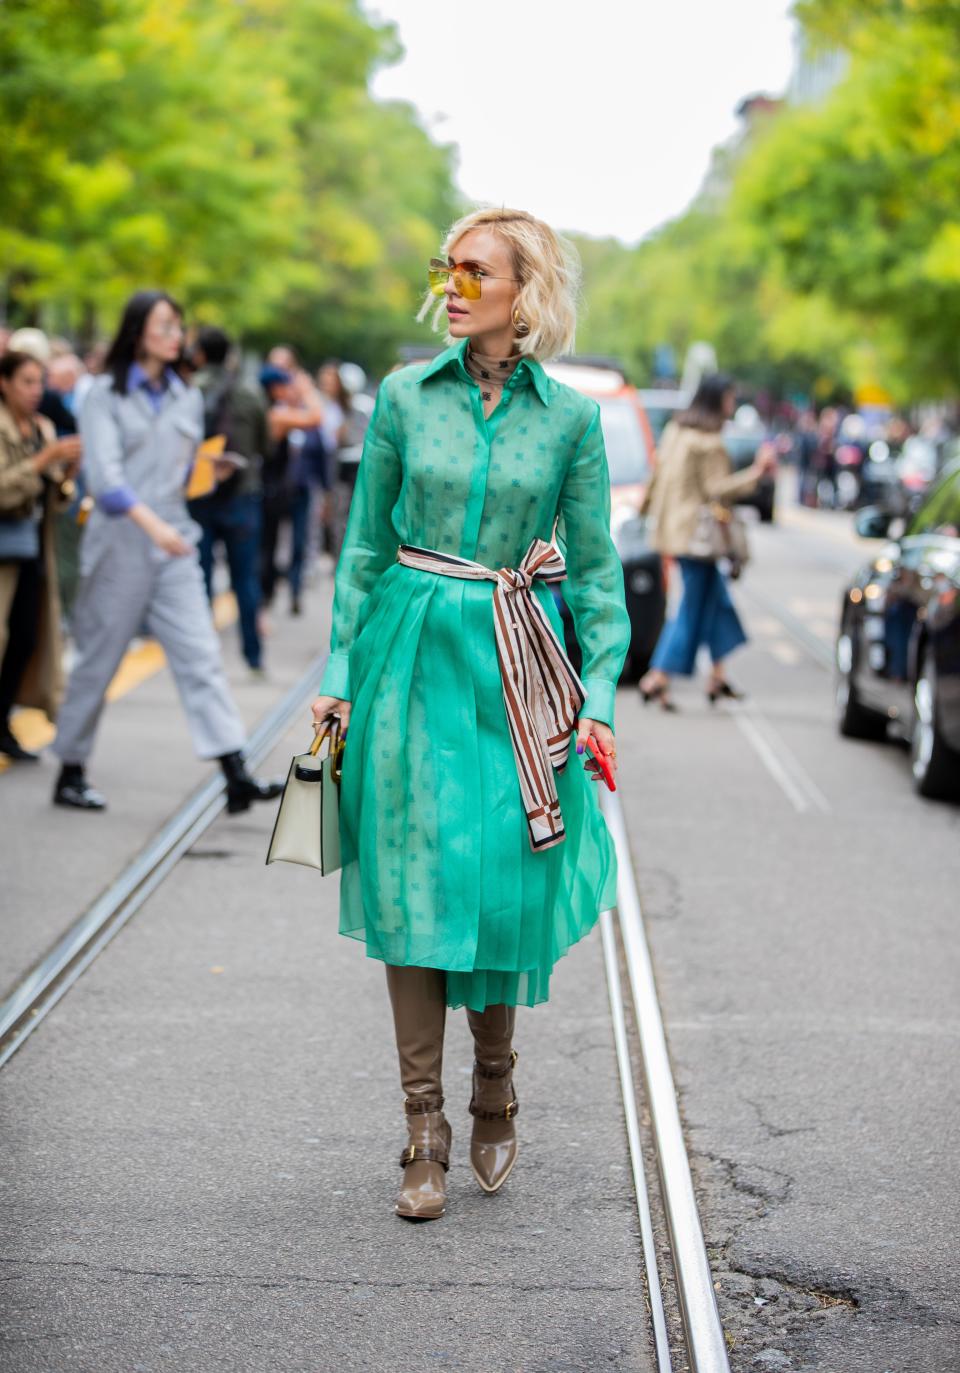 Amp Up Your Favorite Green Dress